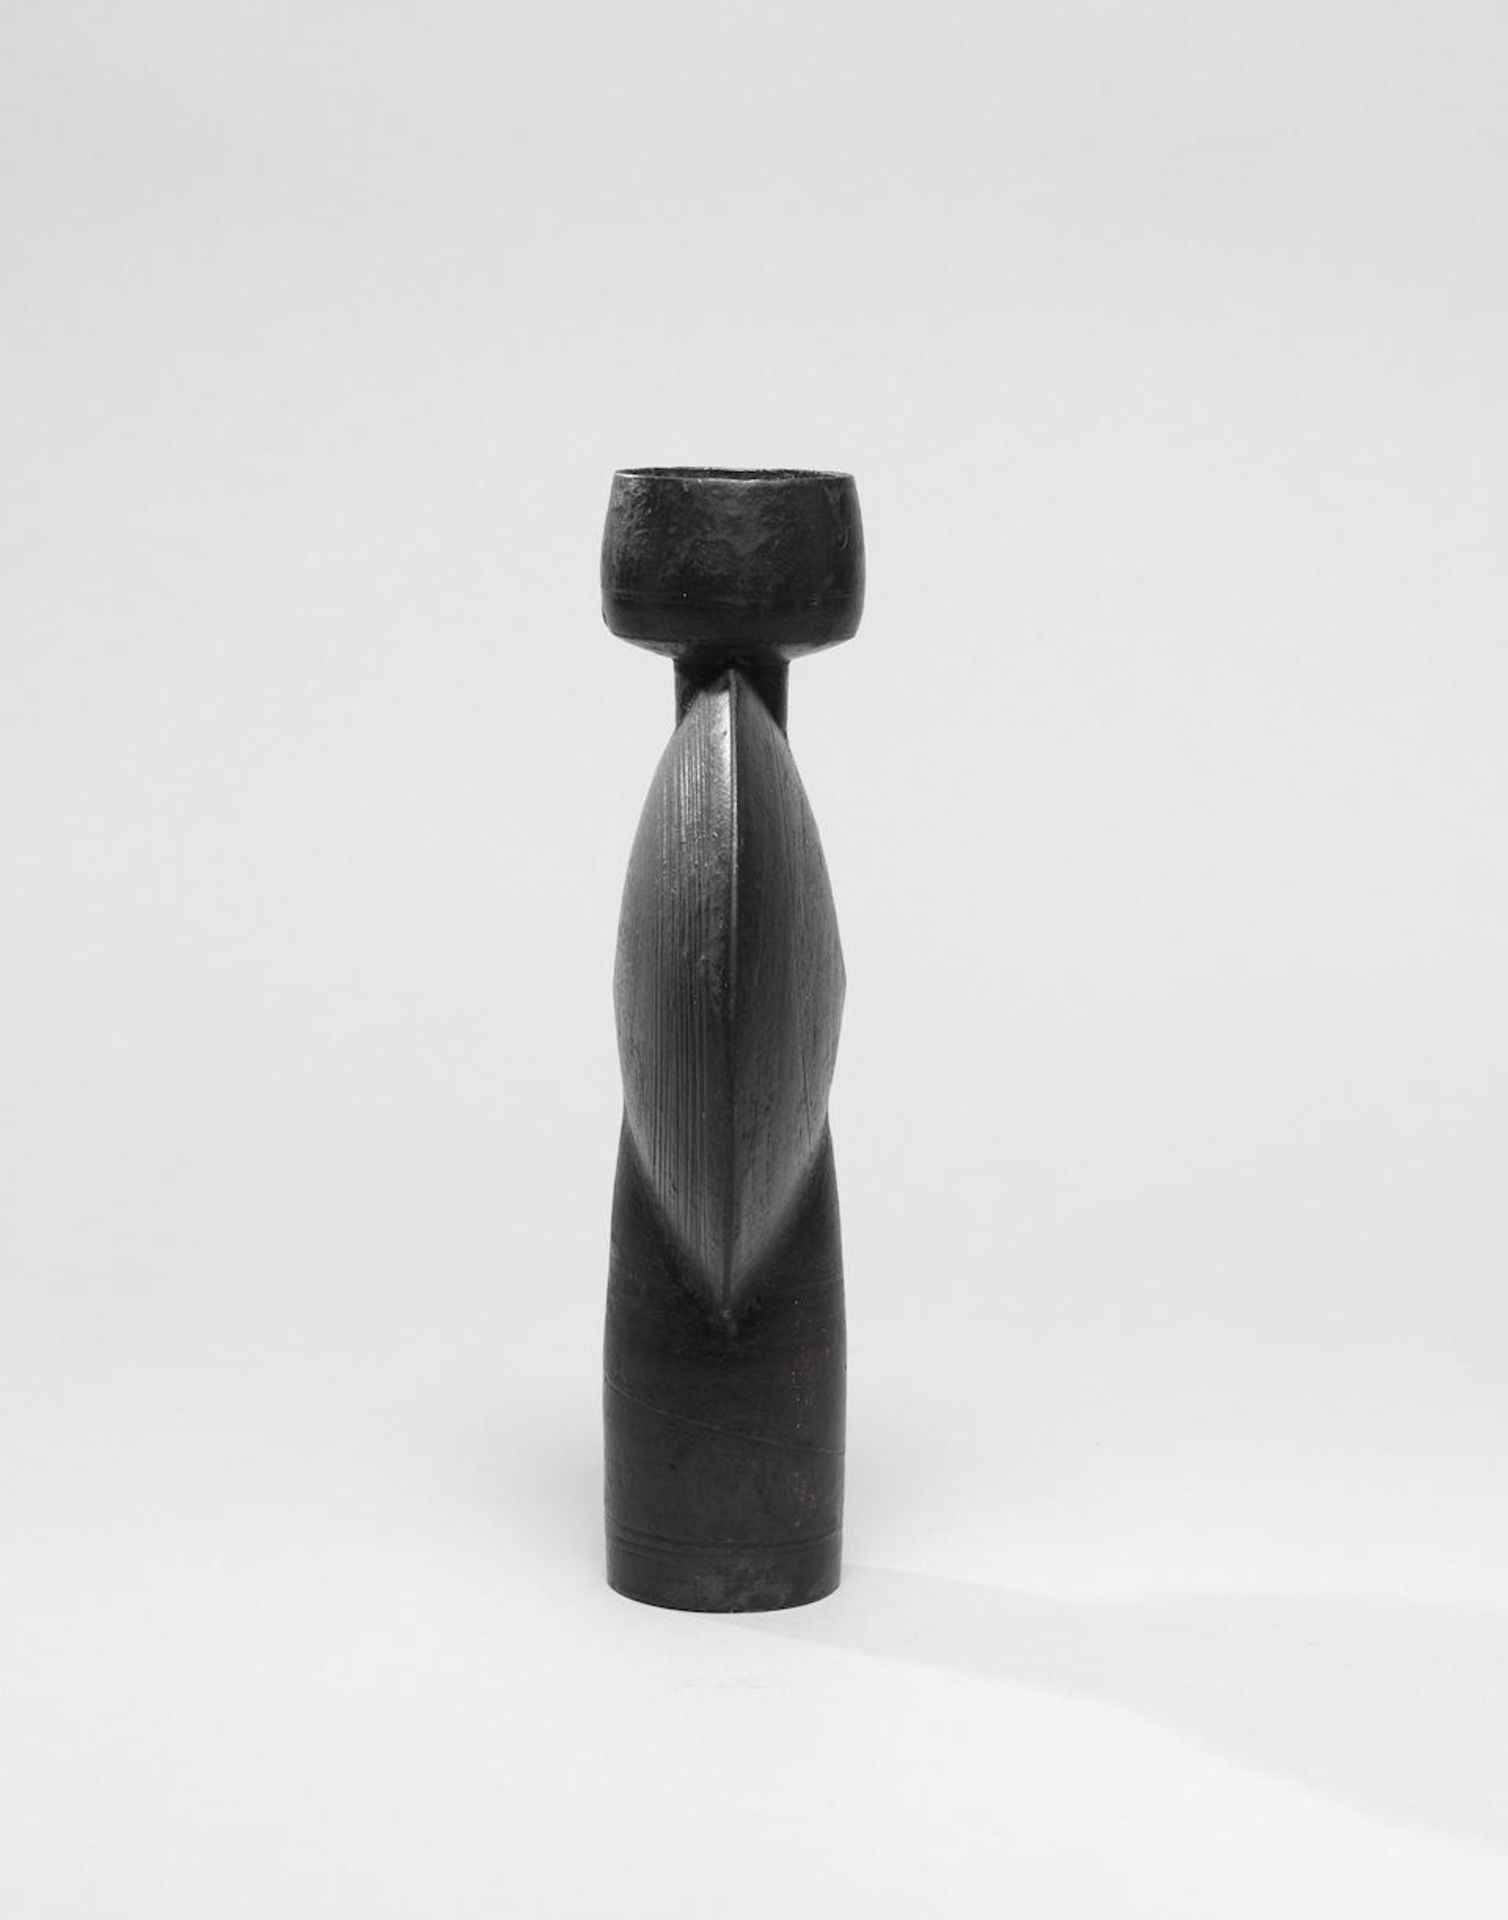 Hans Coper Composite form with central disc, circa 1967 - Image 3 of 9